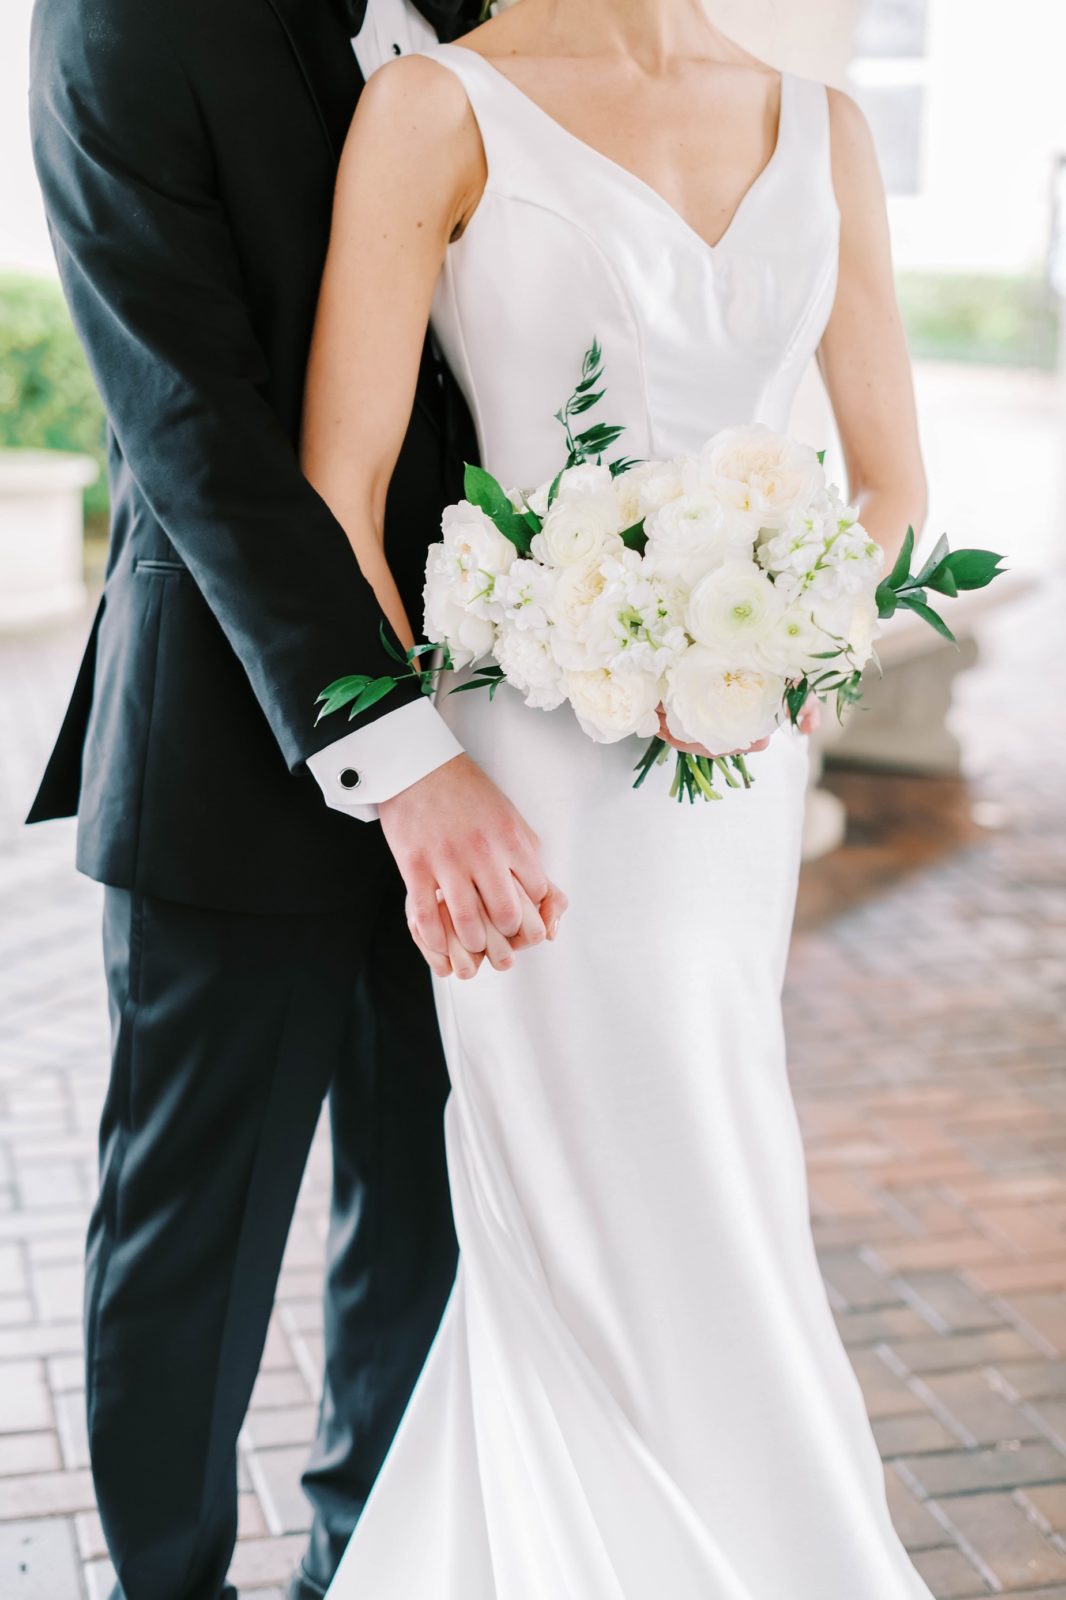 Christina Elliott Photography captures a close-up of a bridal gown and bridal bouquet in Houston, Texas. Houston wedding photographer #christinaelliottphotography #Houstonweddings #catholicchurchweddings #navyblue #sayIdo #Houstonweddingphotographers